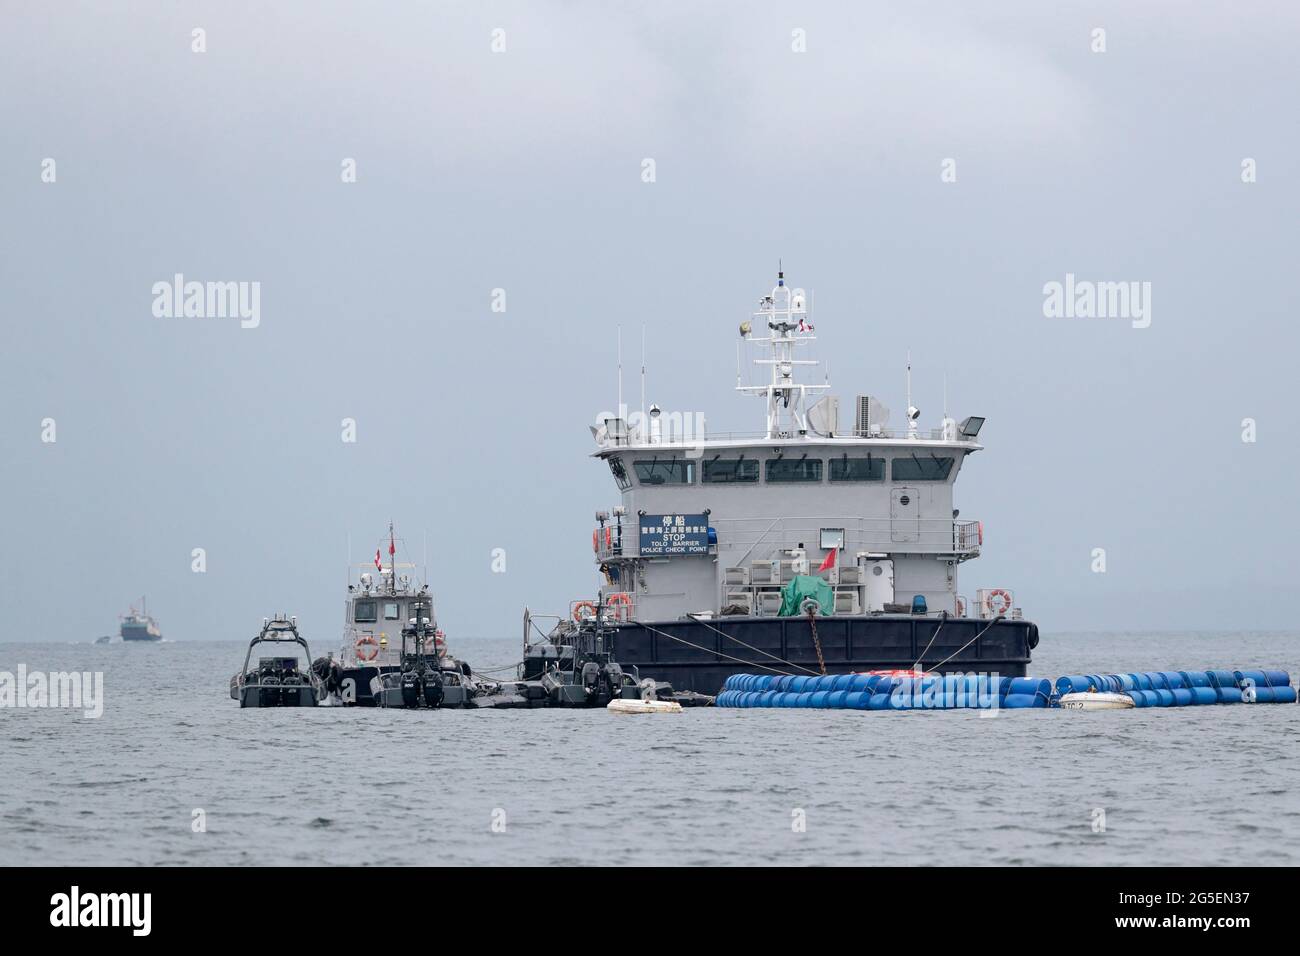 “Tolo Barrier” - view of police check point barge and anti-smuggling barrage, Tolo Harbour, northeast Hong Kong, China 25th June 2021 Stock Photo